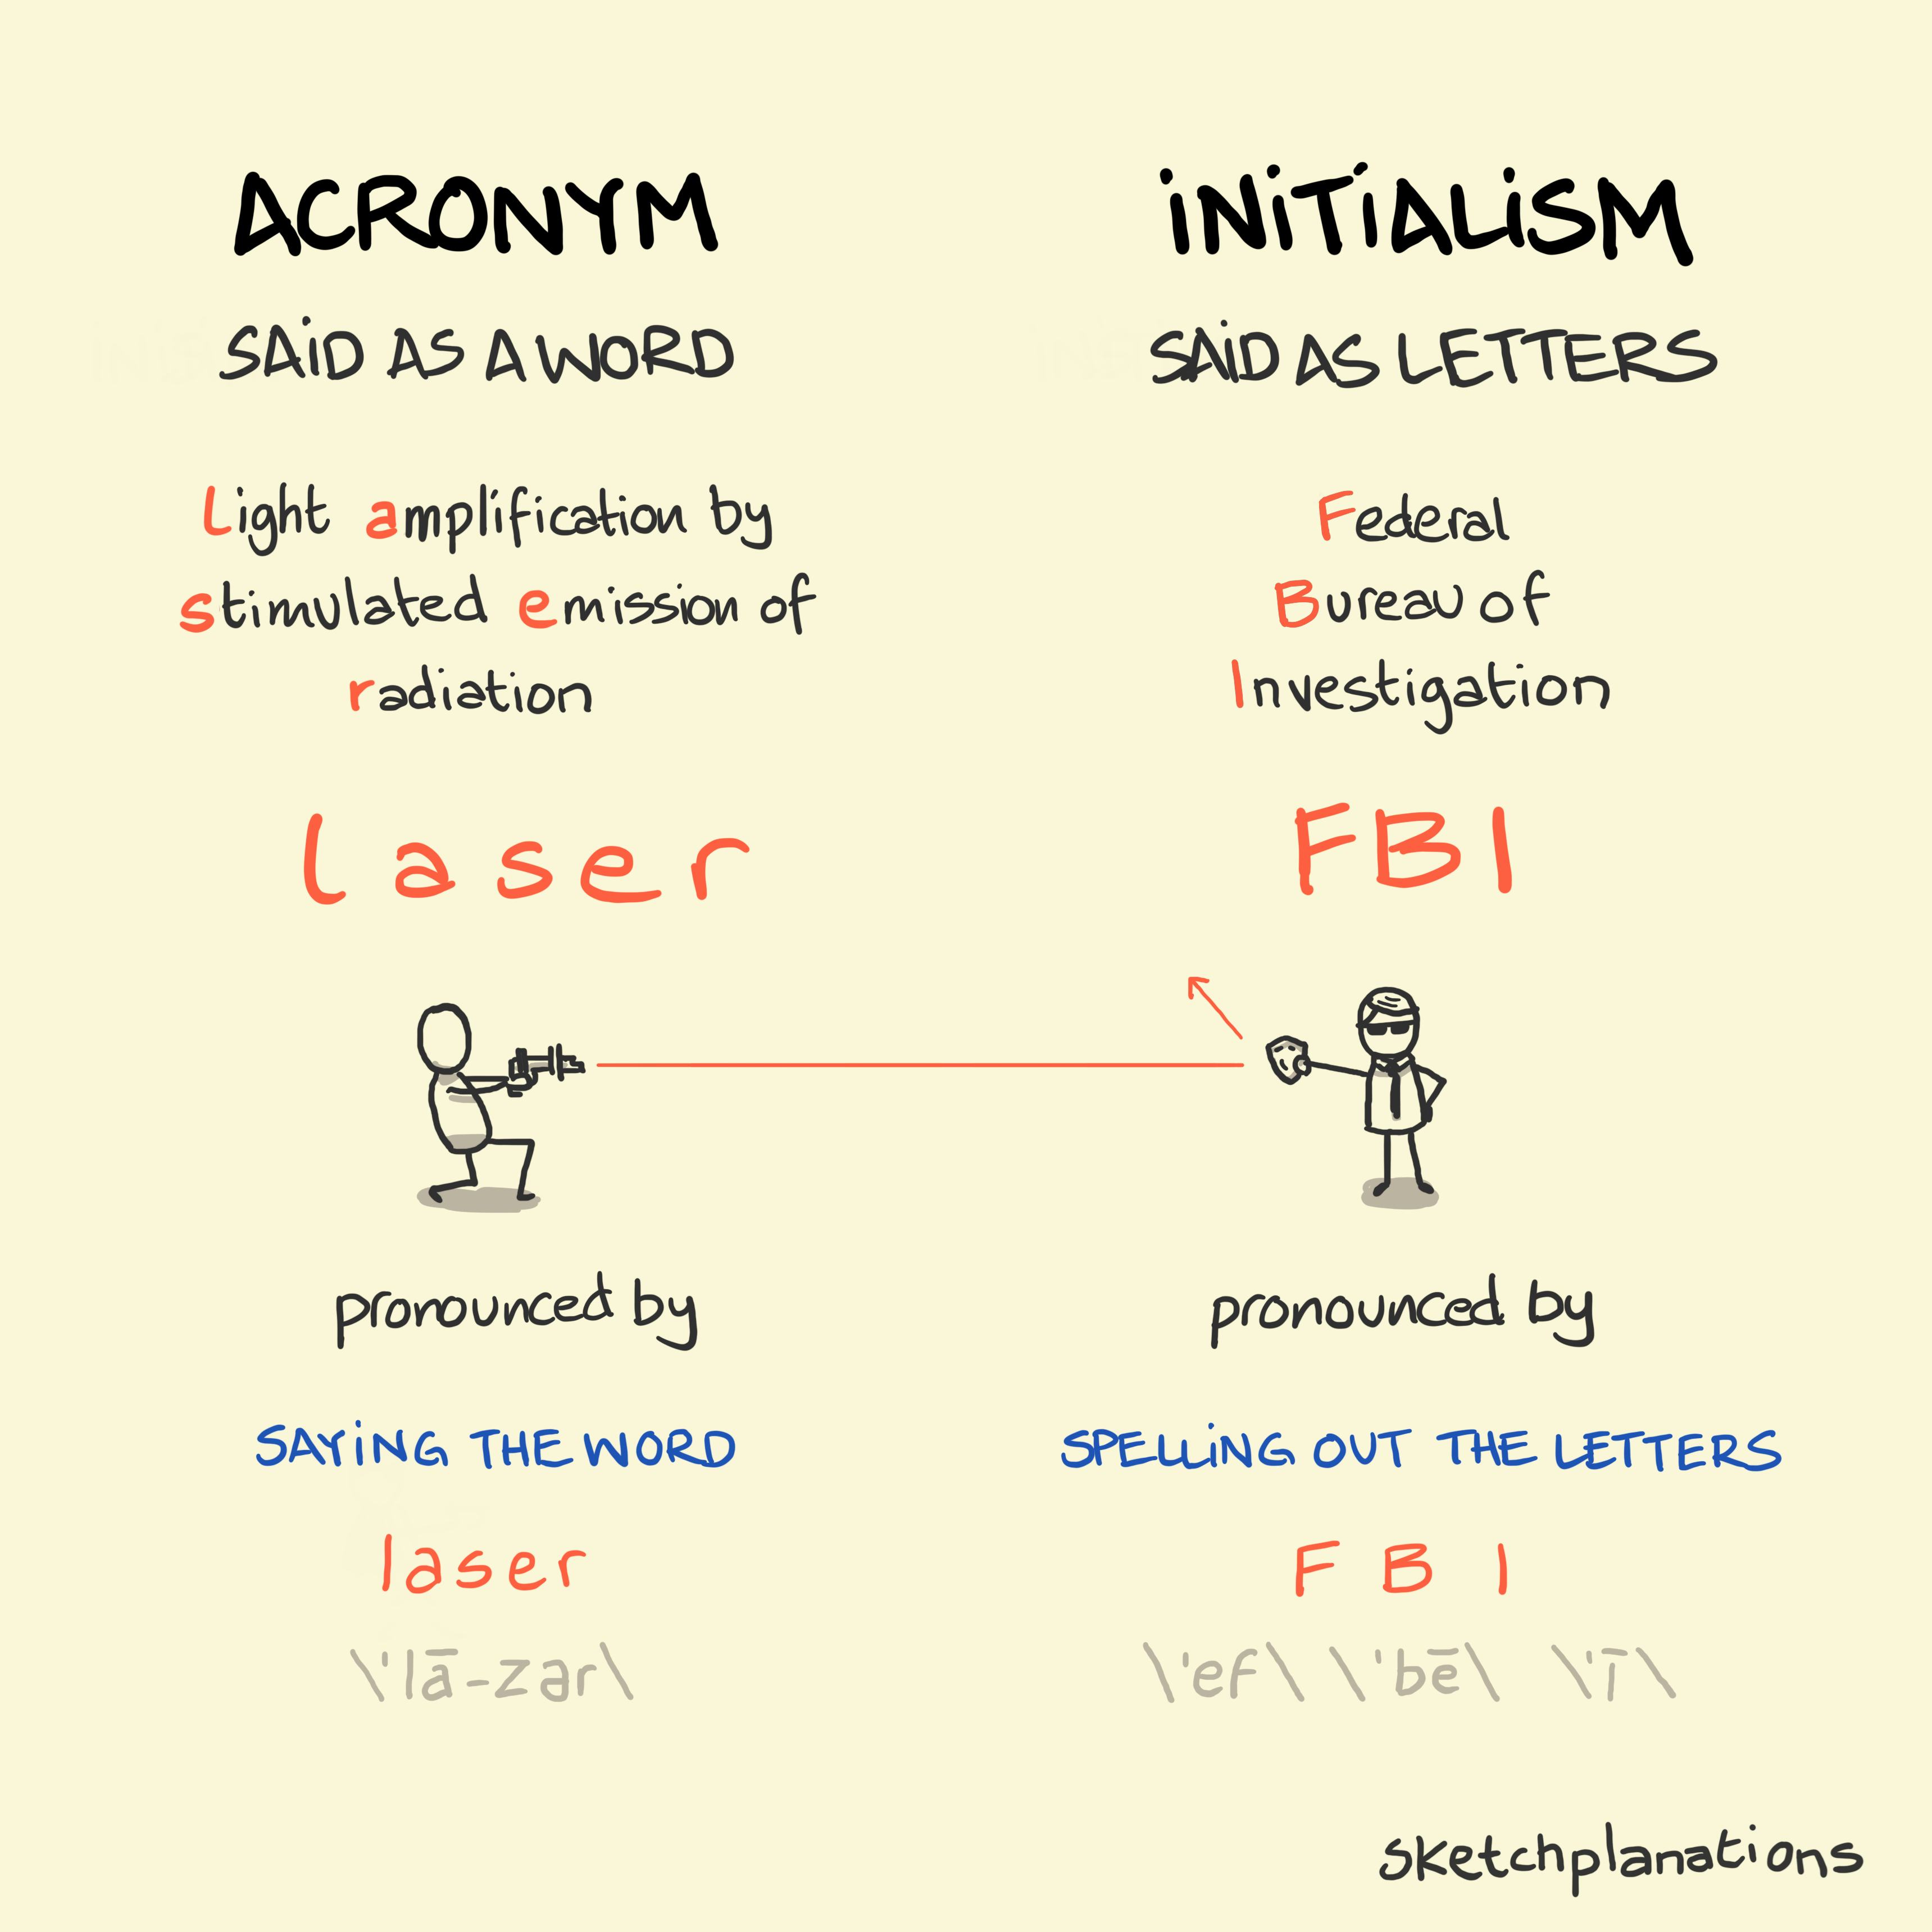 Acronym vs initialism illustration: comparing the acronym laser—pronounced as a word— and the initialism FBI—pronounced by saying the letters